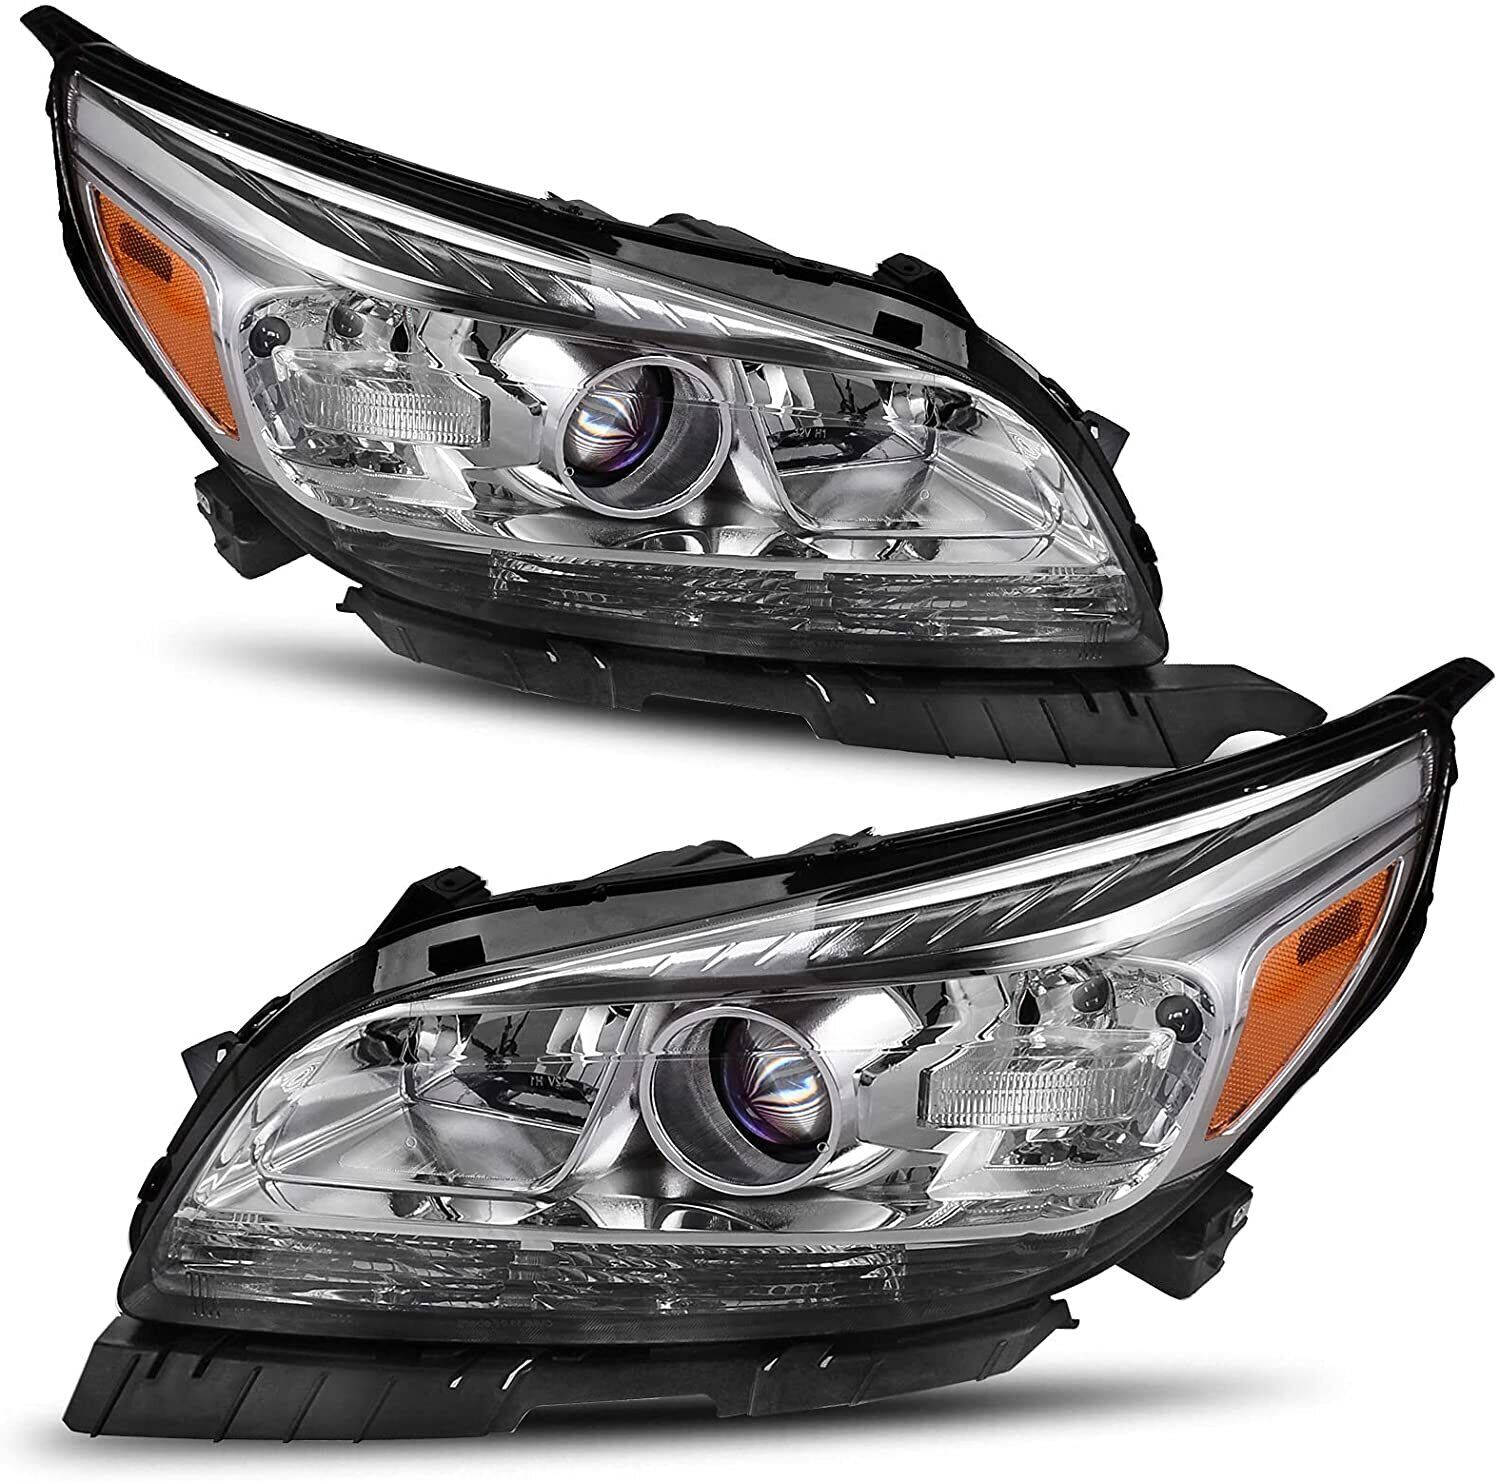 Headlights For 2013 2014 2015 Chevy Malibu 16 Limited Headlamps Pair Projector